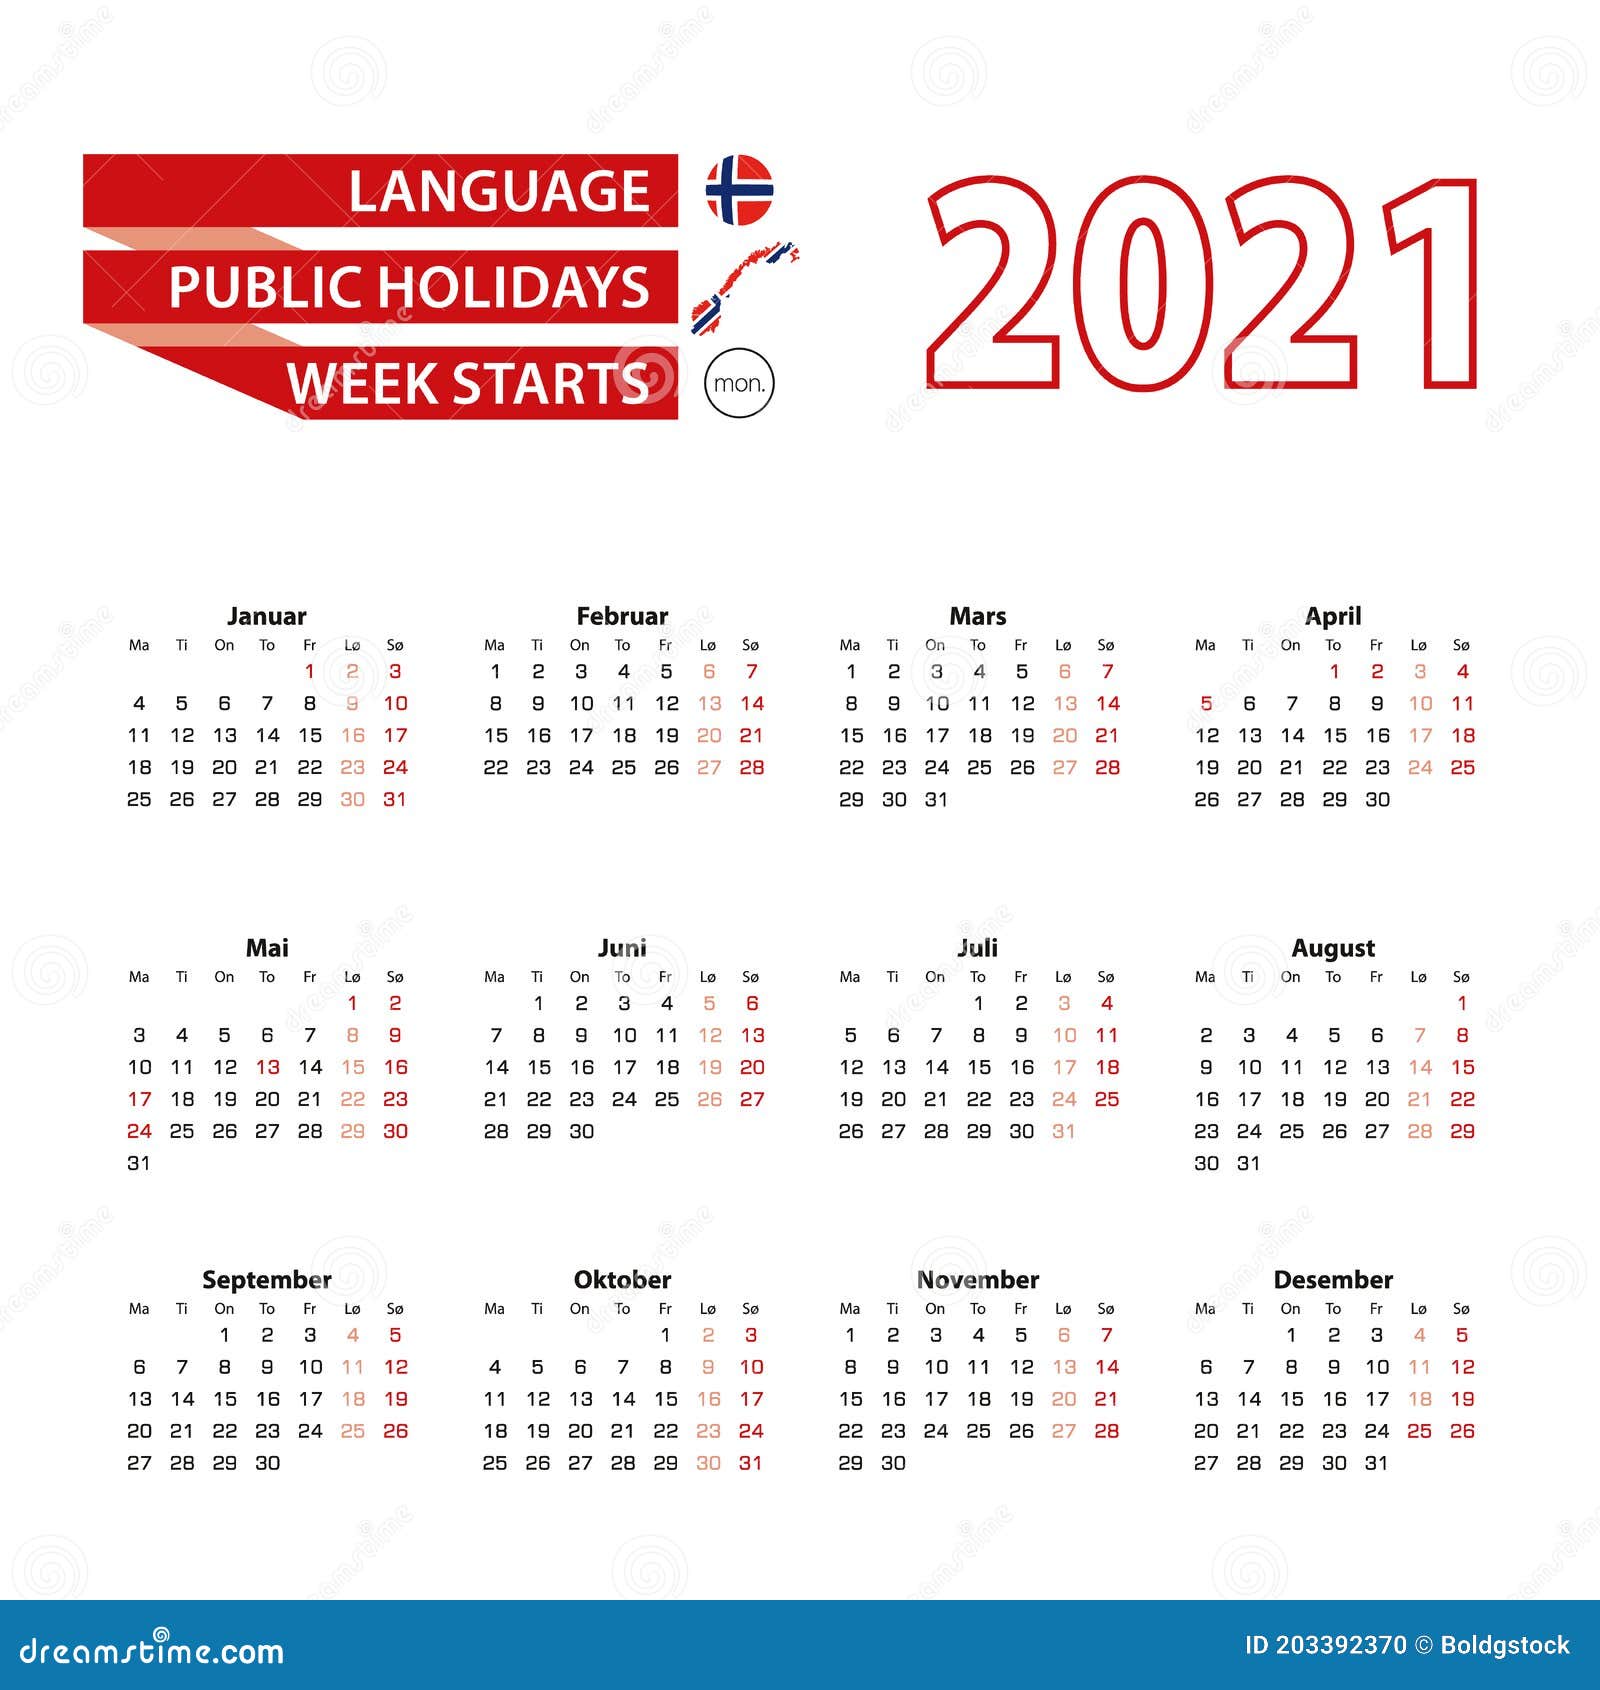 Calendar 2021 In Norwegian Language With Public Holidays The Country Of